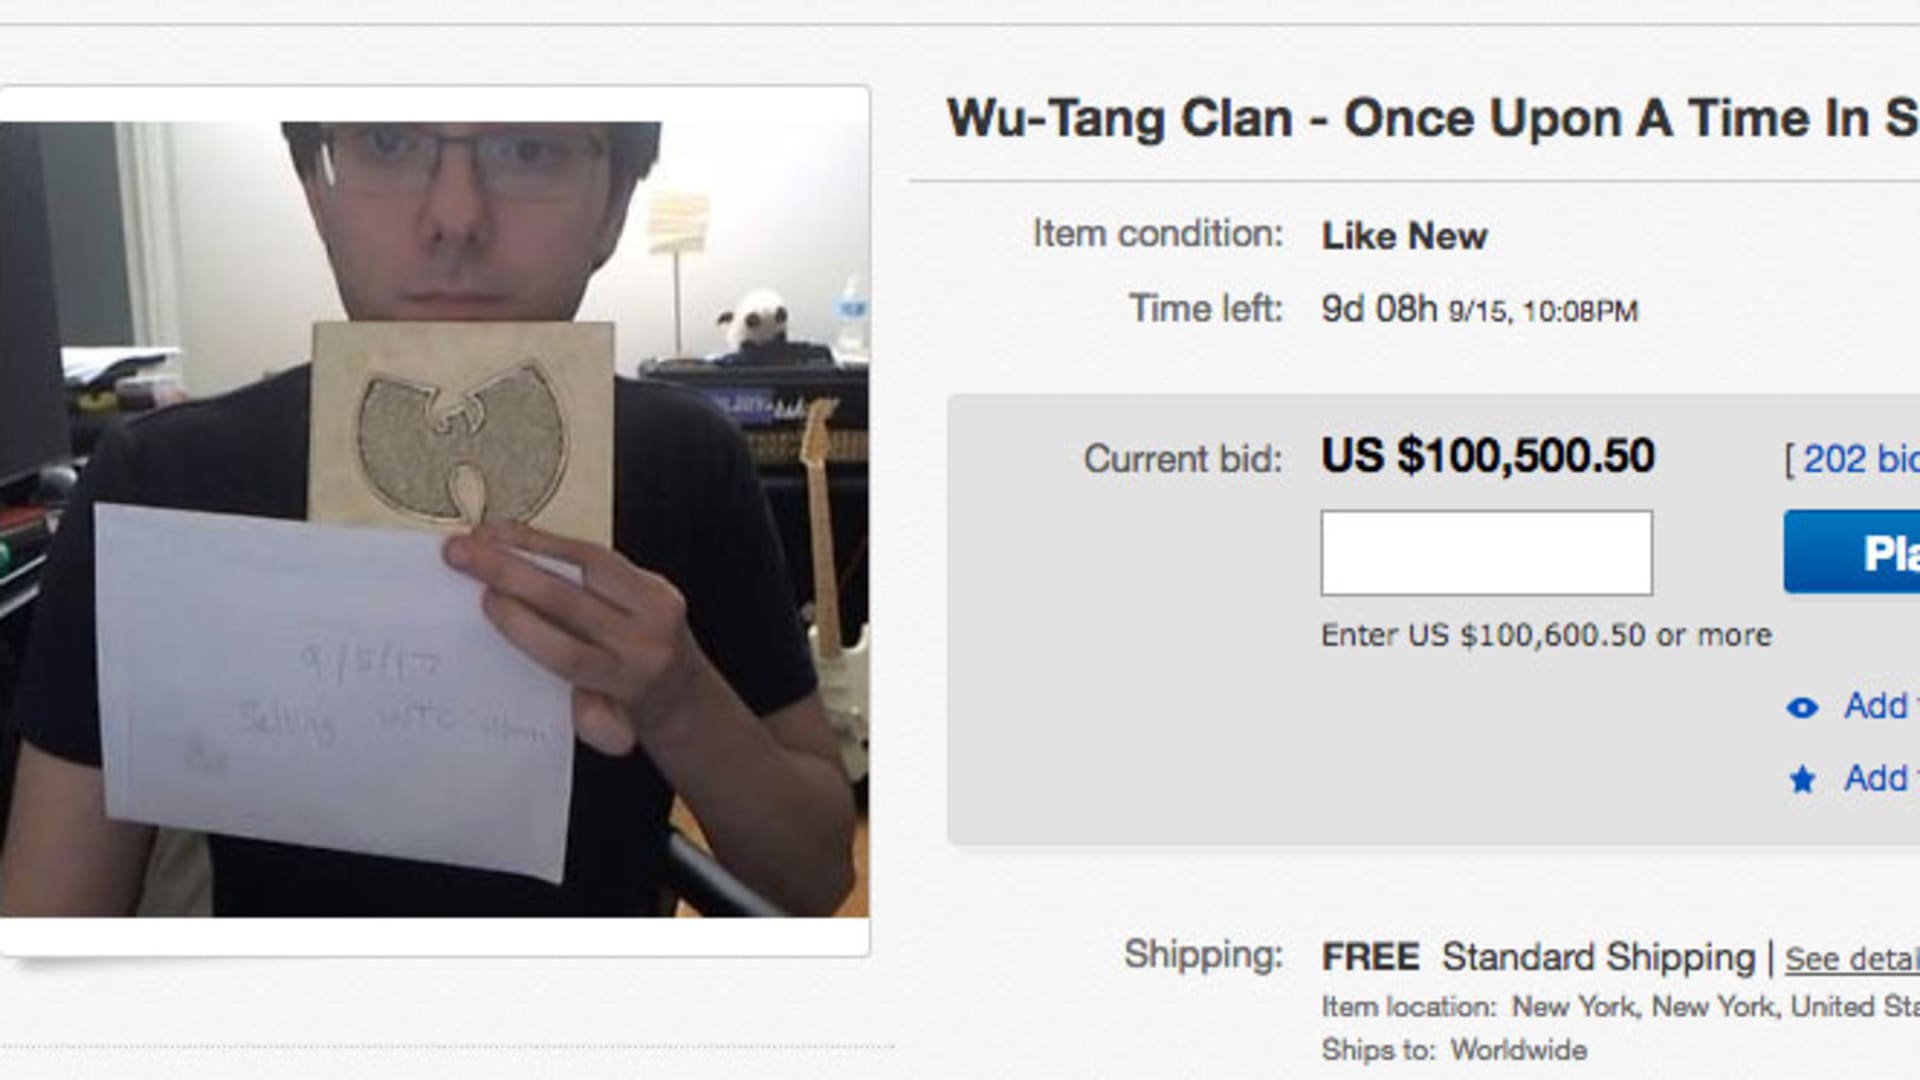 Martin Shkreli holds up a rare Wu-Tang Clan album for sale. 